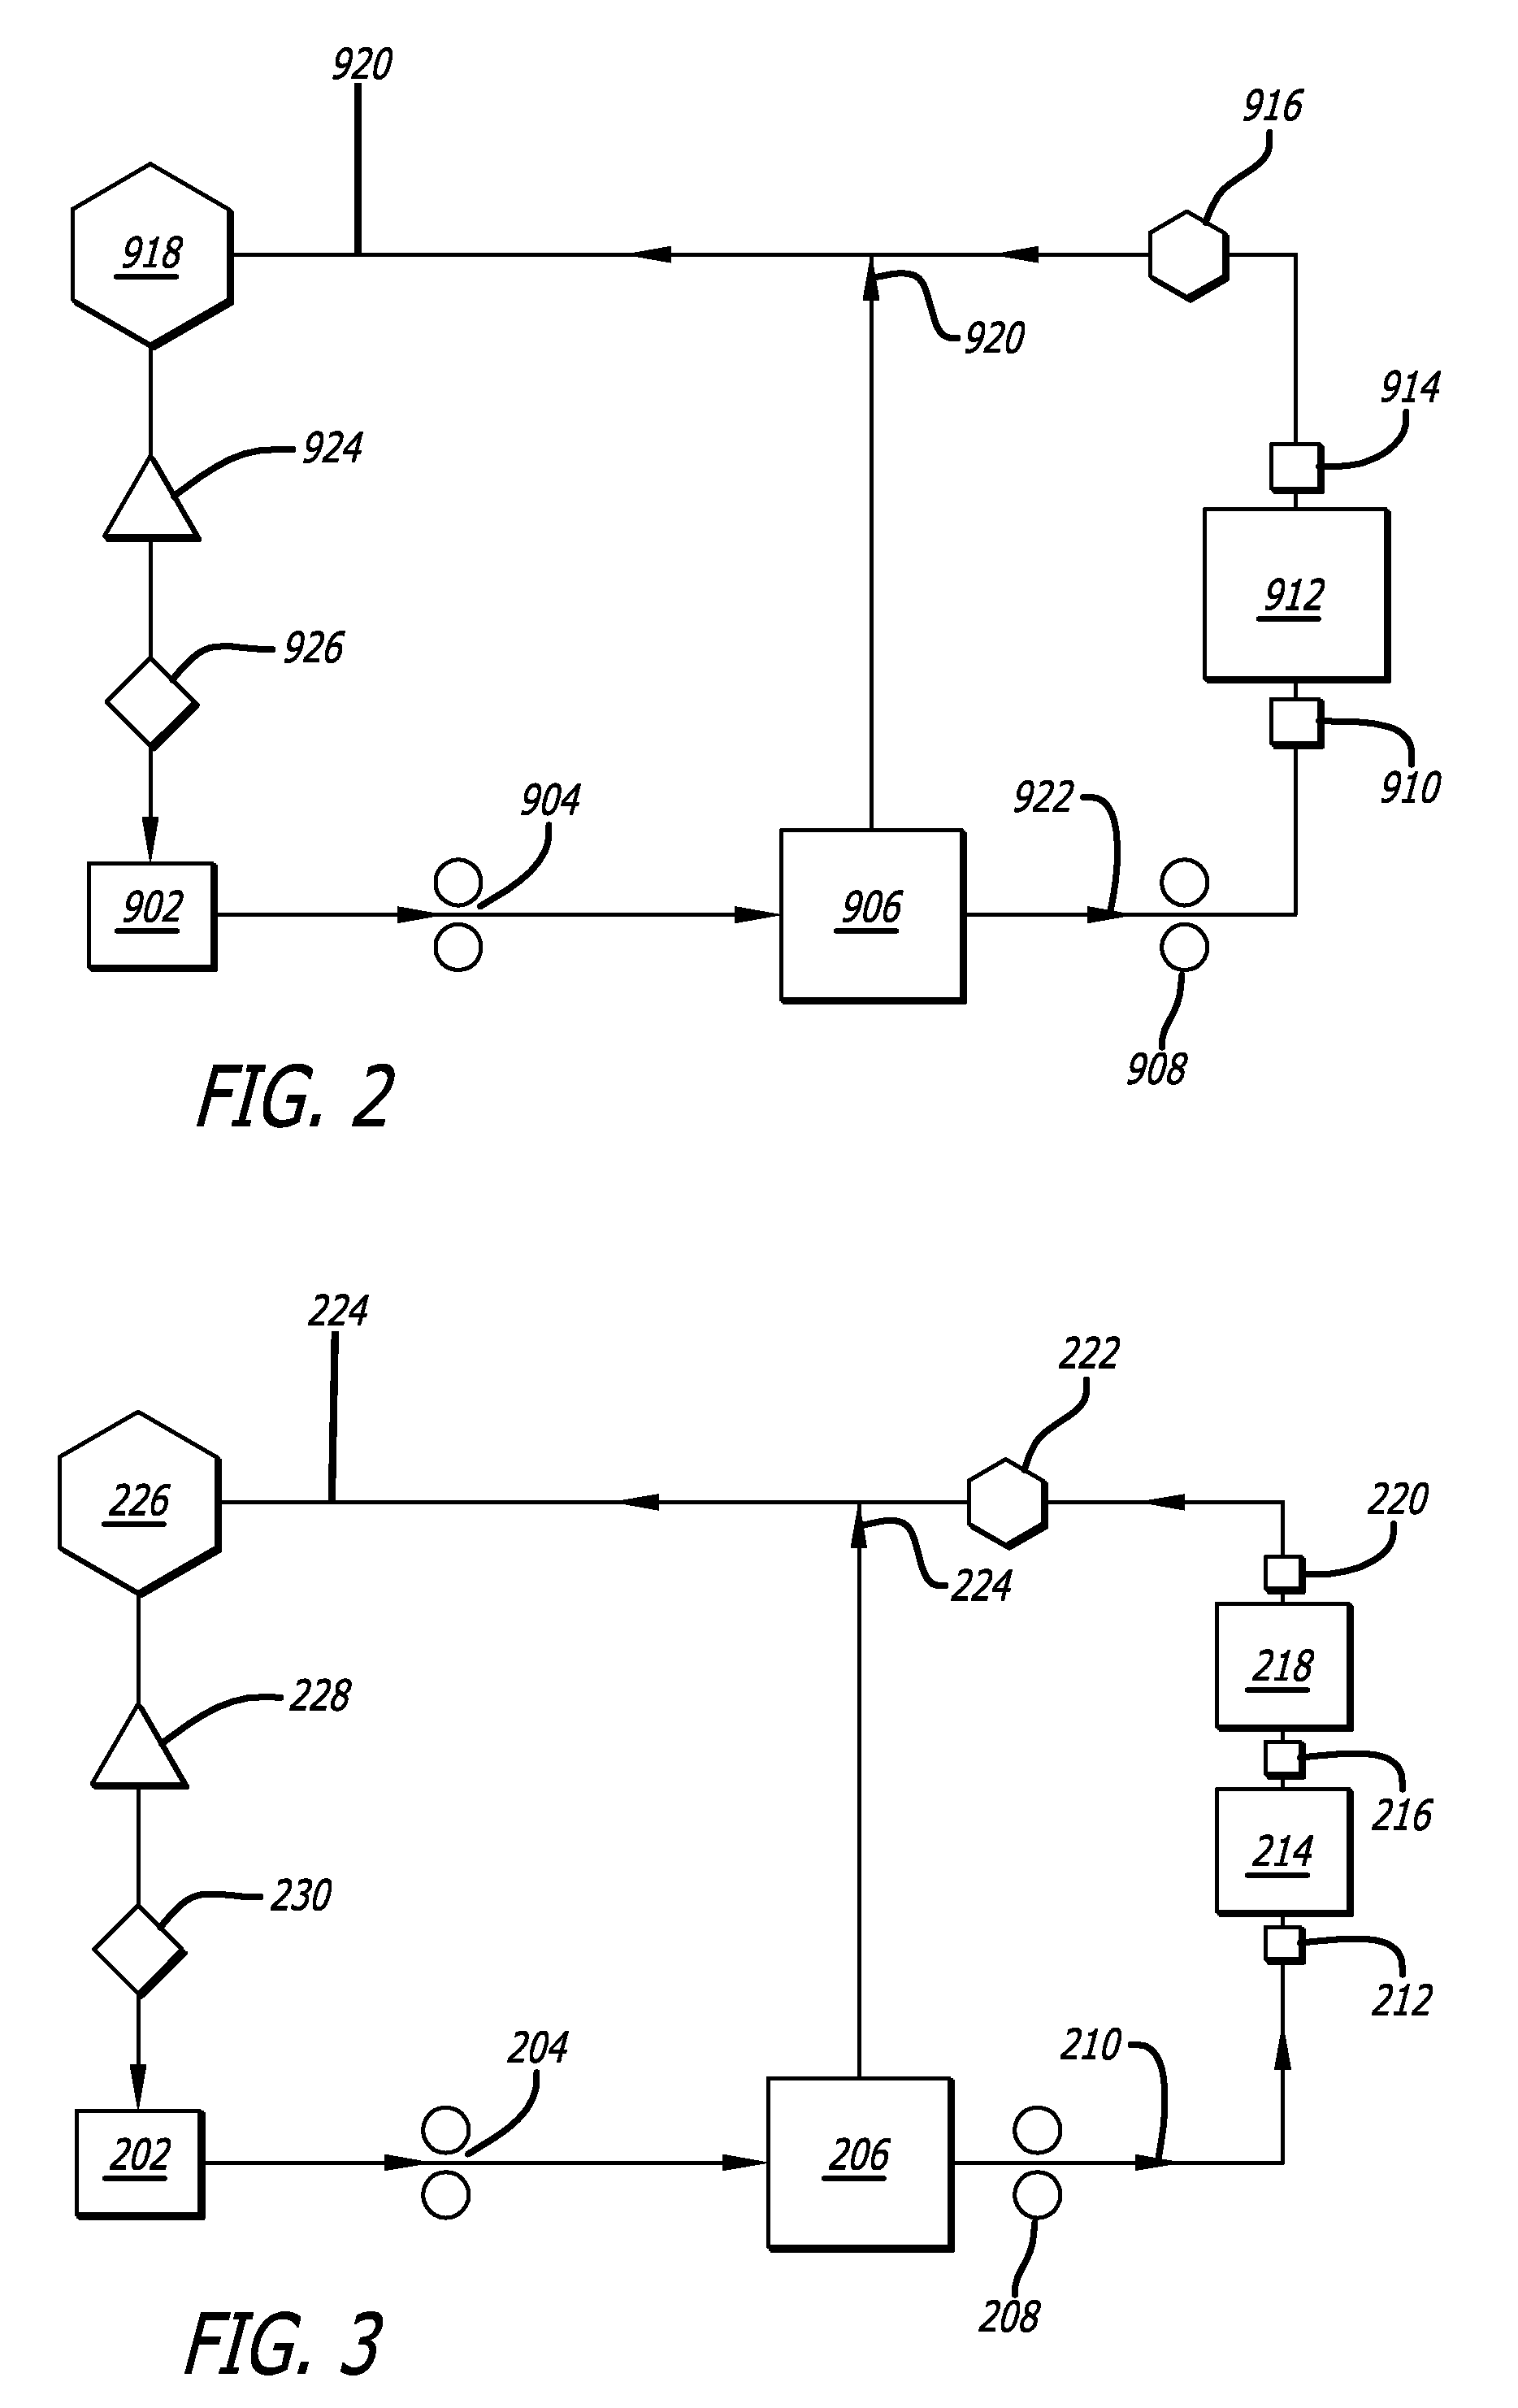 Plasma detoxification and volume control system and methods of use